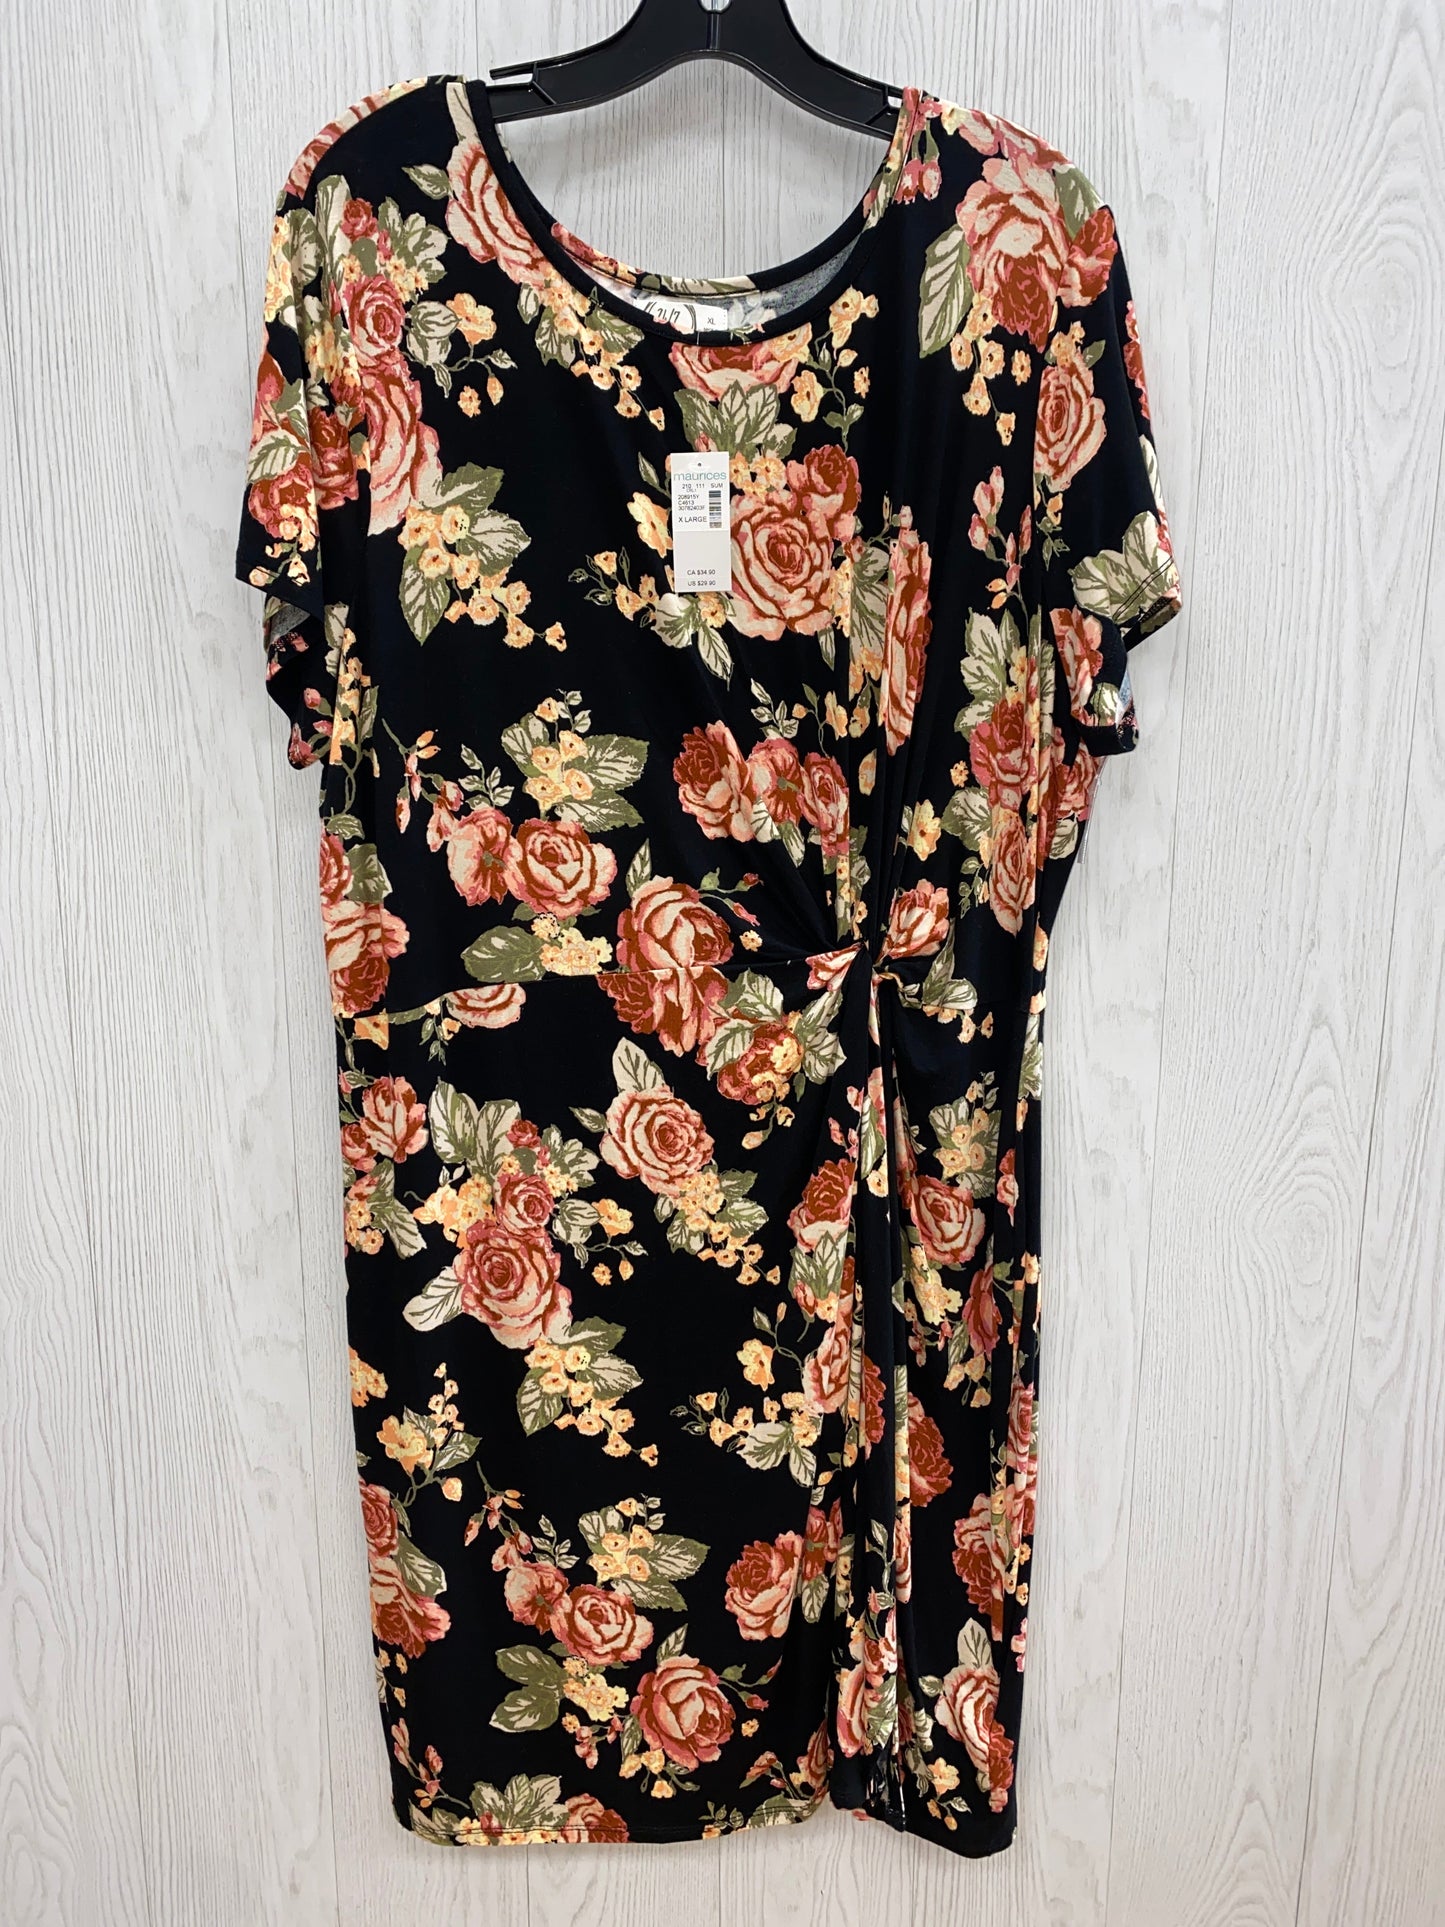 Floral Print Dress Casual Short Maurices, Size Xl